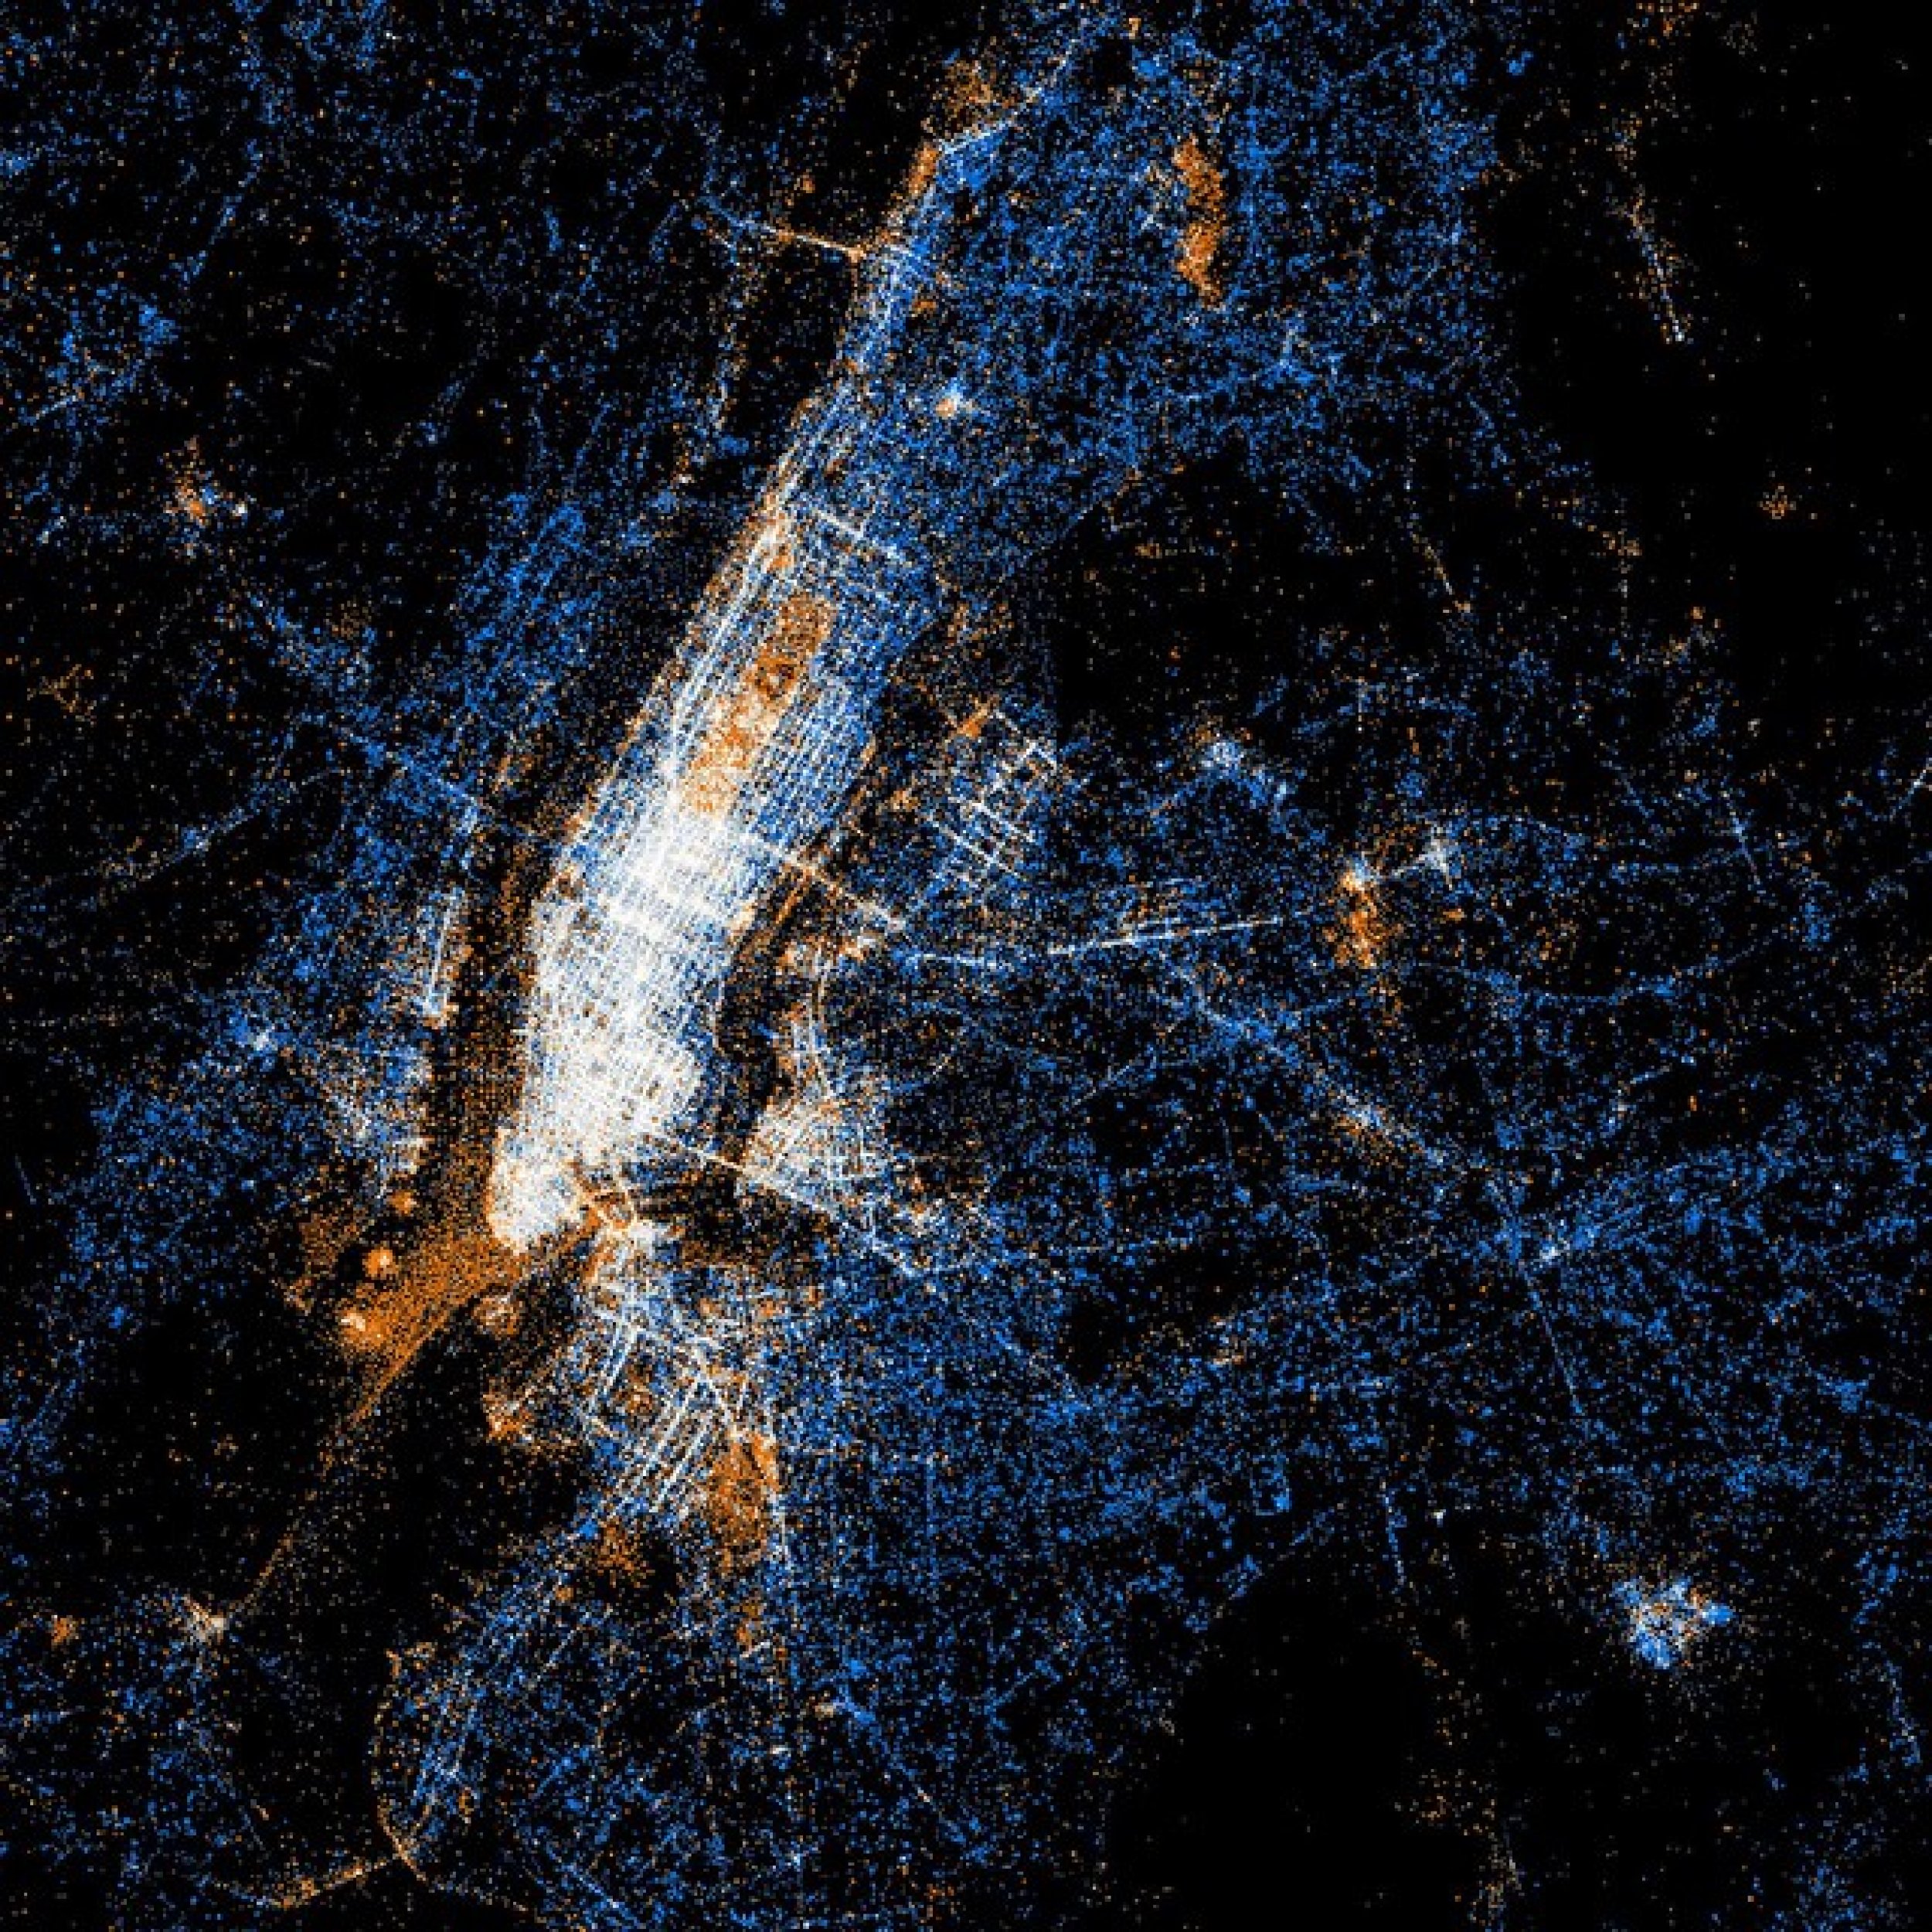 Map showing Twitter, Flickr usage in New York